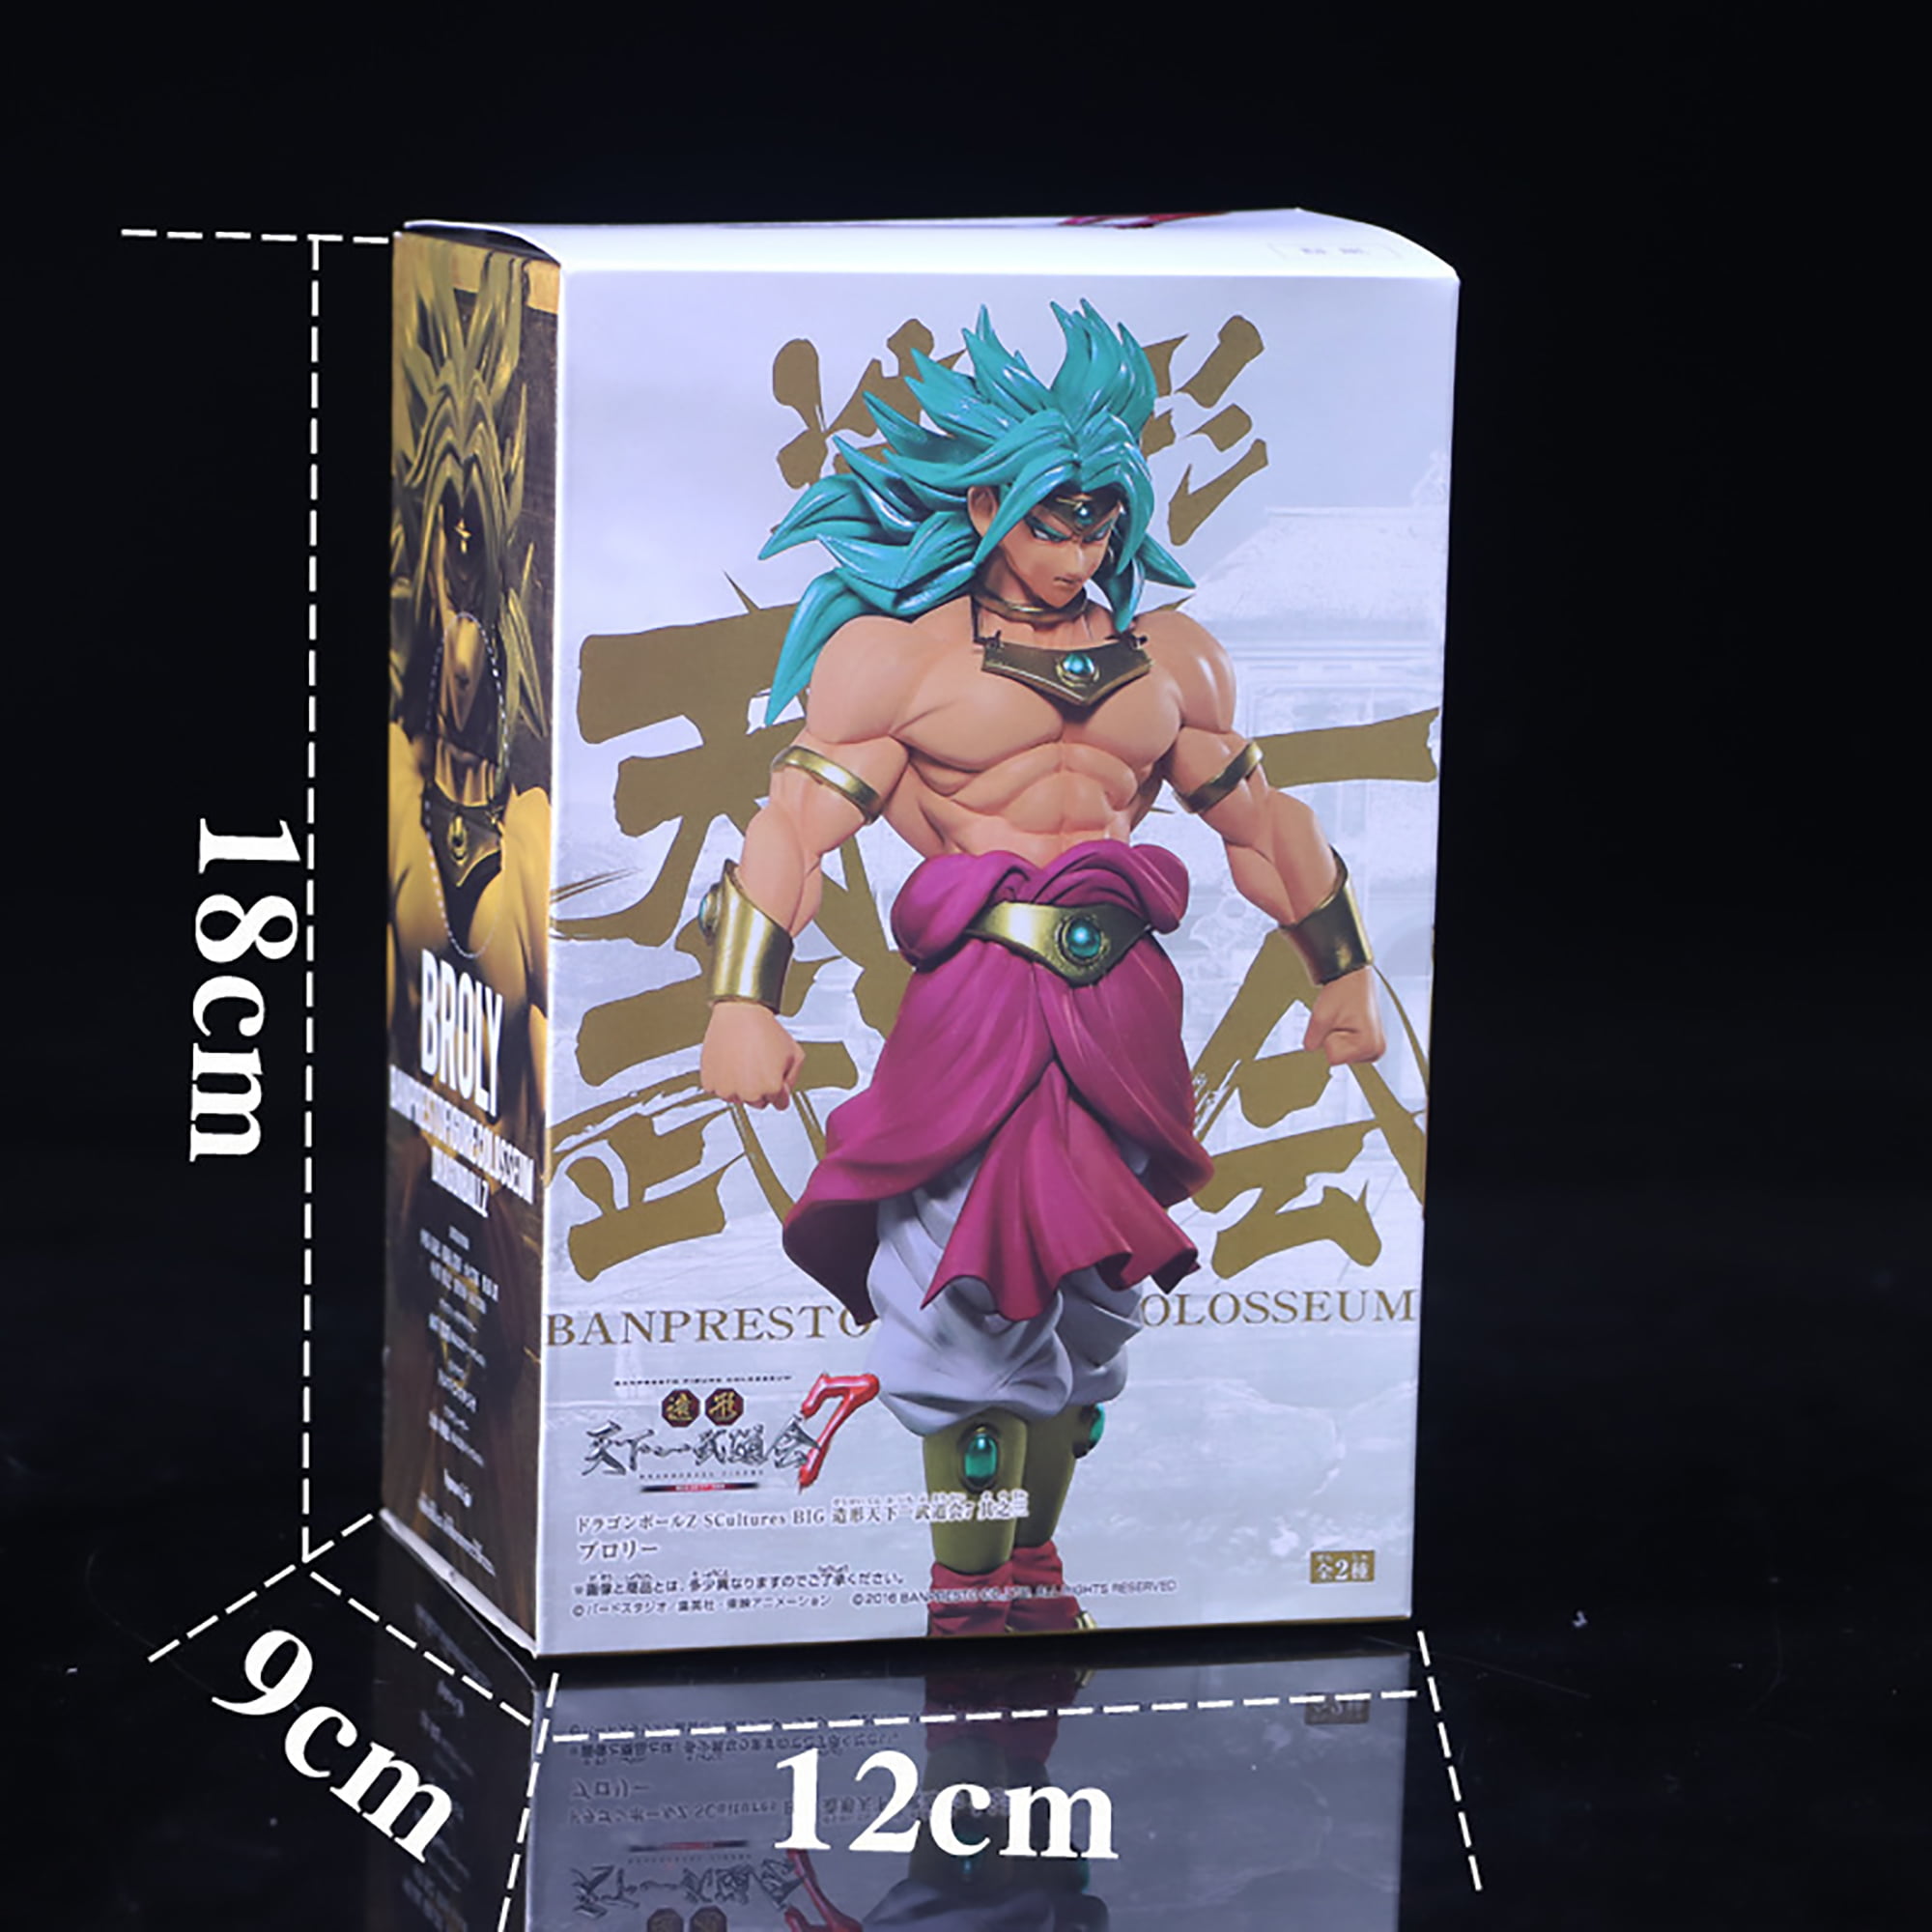 Banpresto Boys Dragon Ball Z Sculptures Big Budoukai 7 vol.3 Figure  Collection - Broly - Broly Action Figure for 180 months to 1000 months